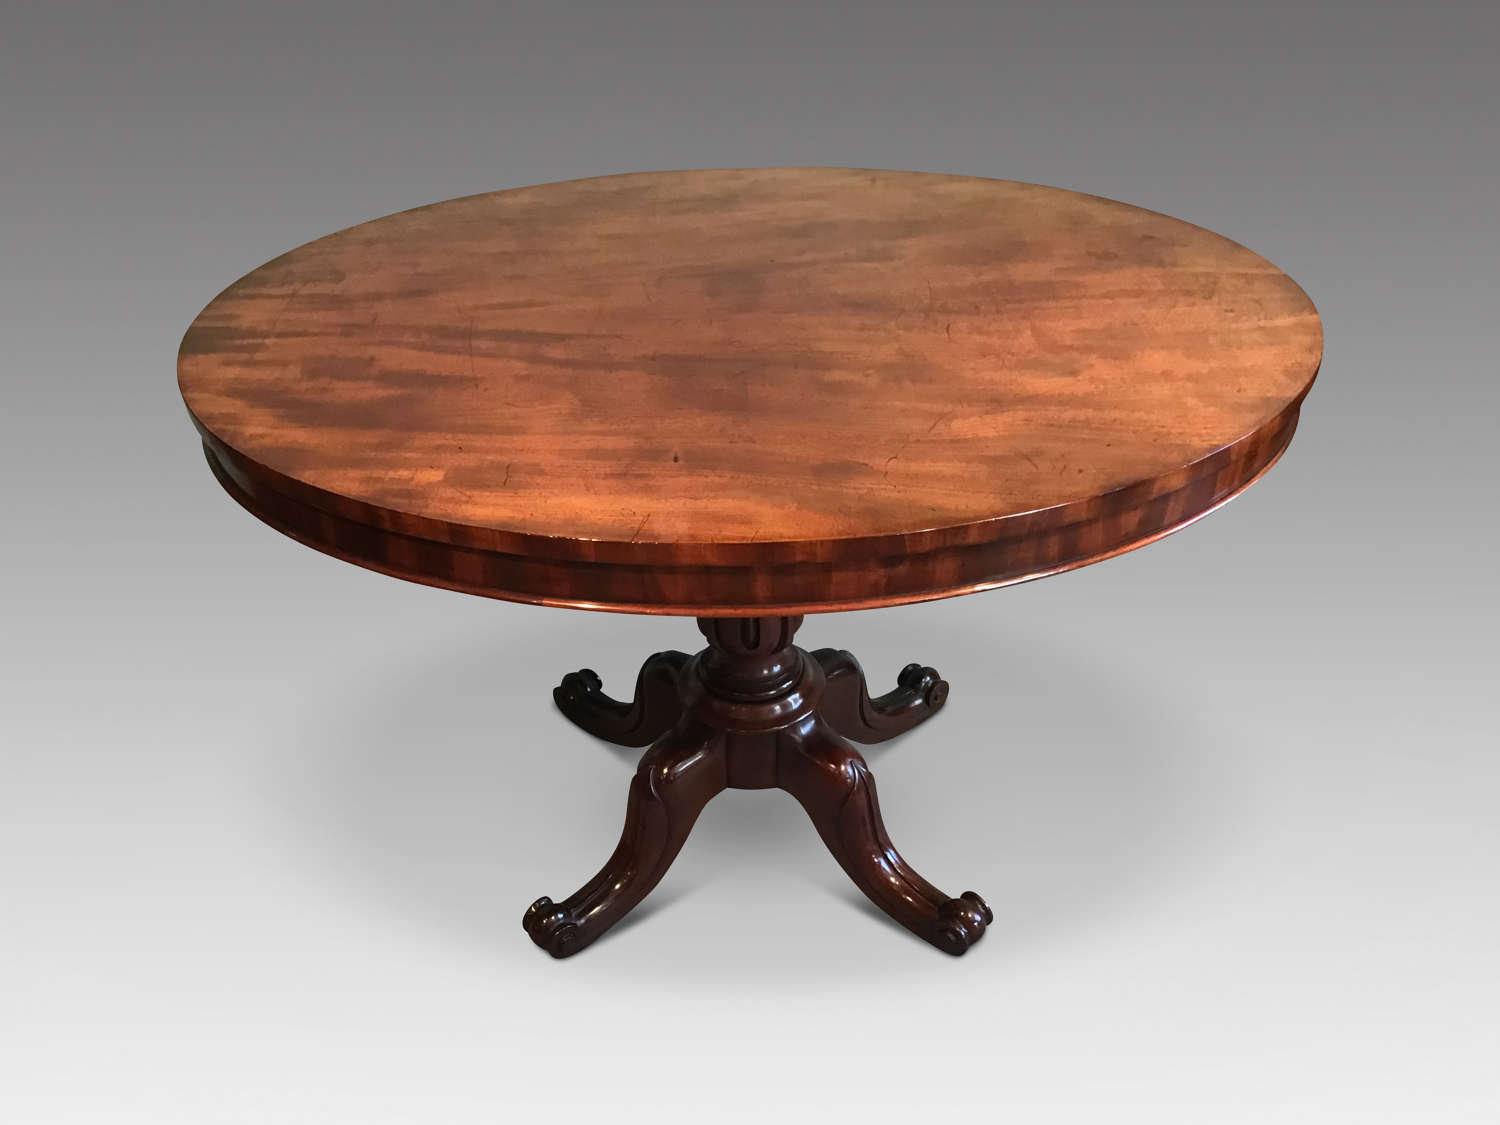 Antique oval centre table